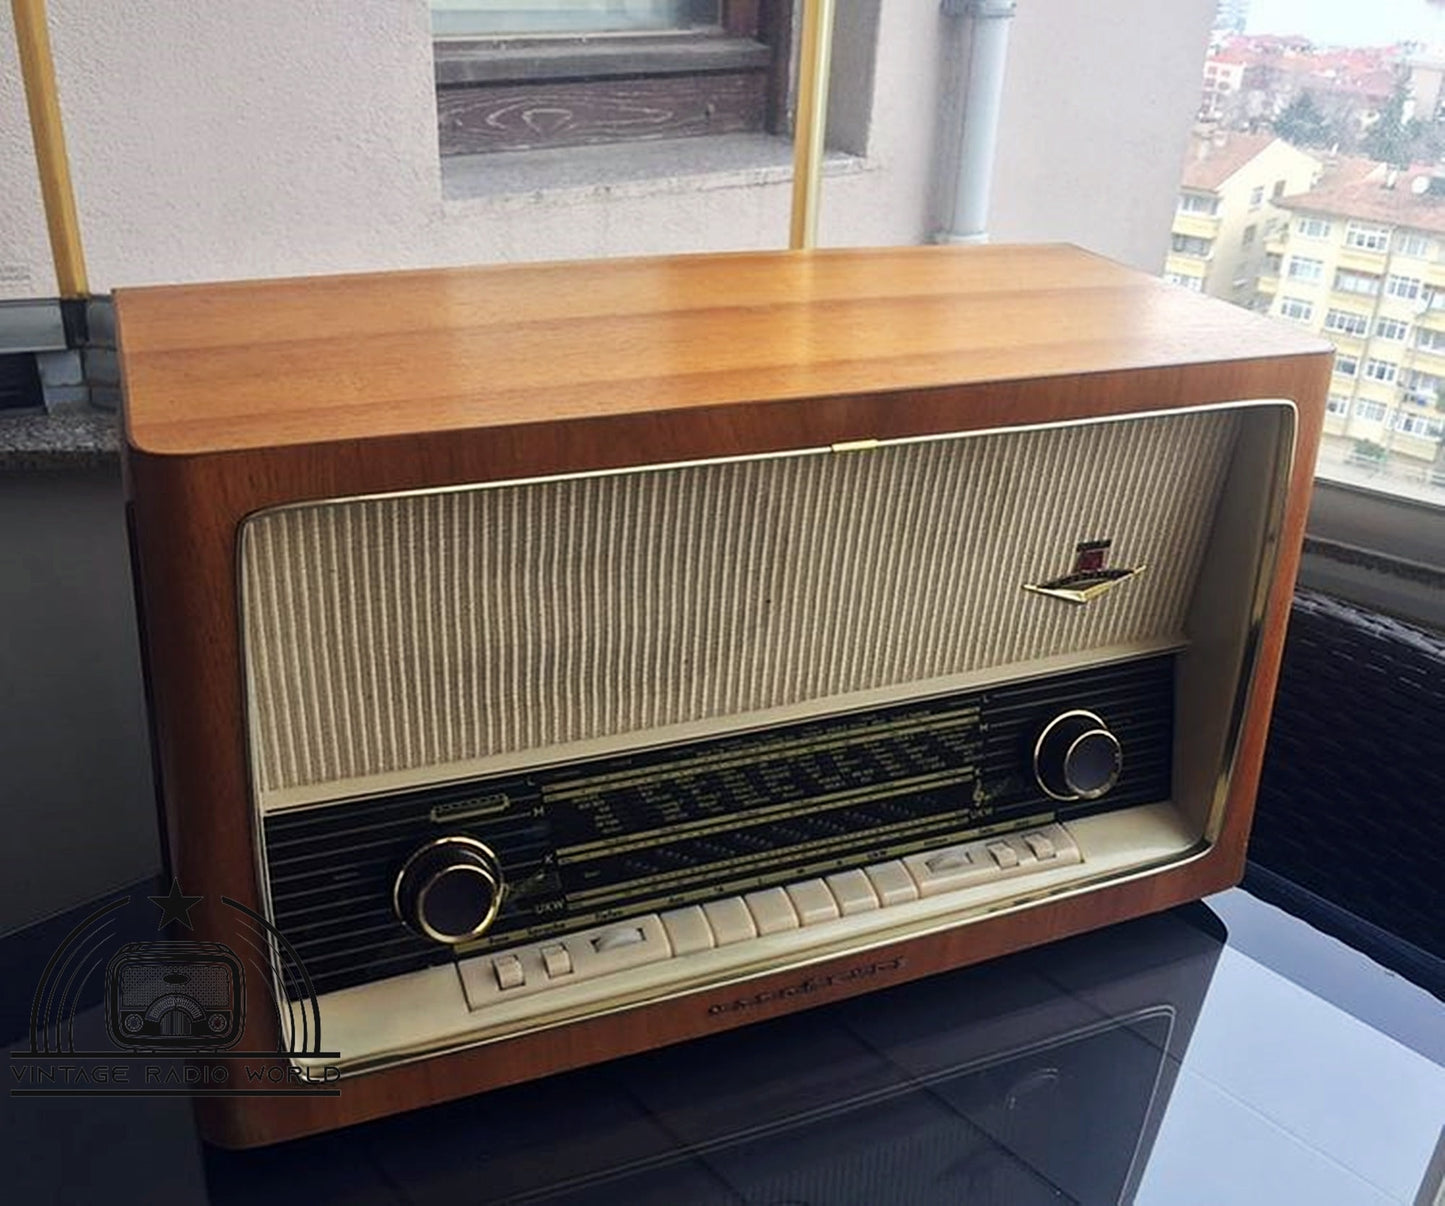 Nordmende Rigoletto Hİ-Fİ - Vintage Radio with Lamp Feature - For Sale